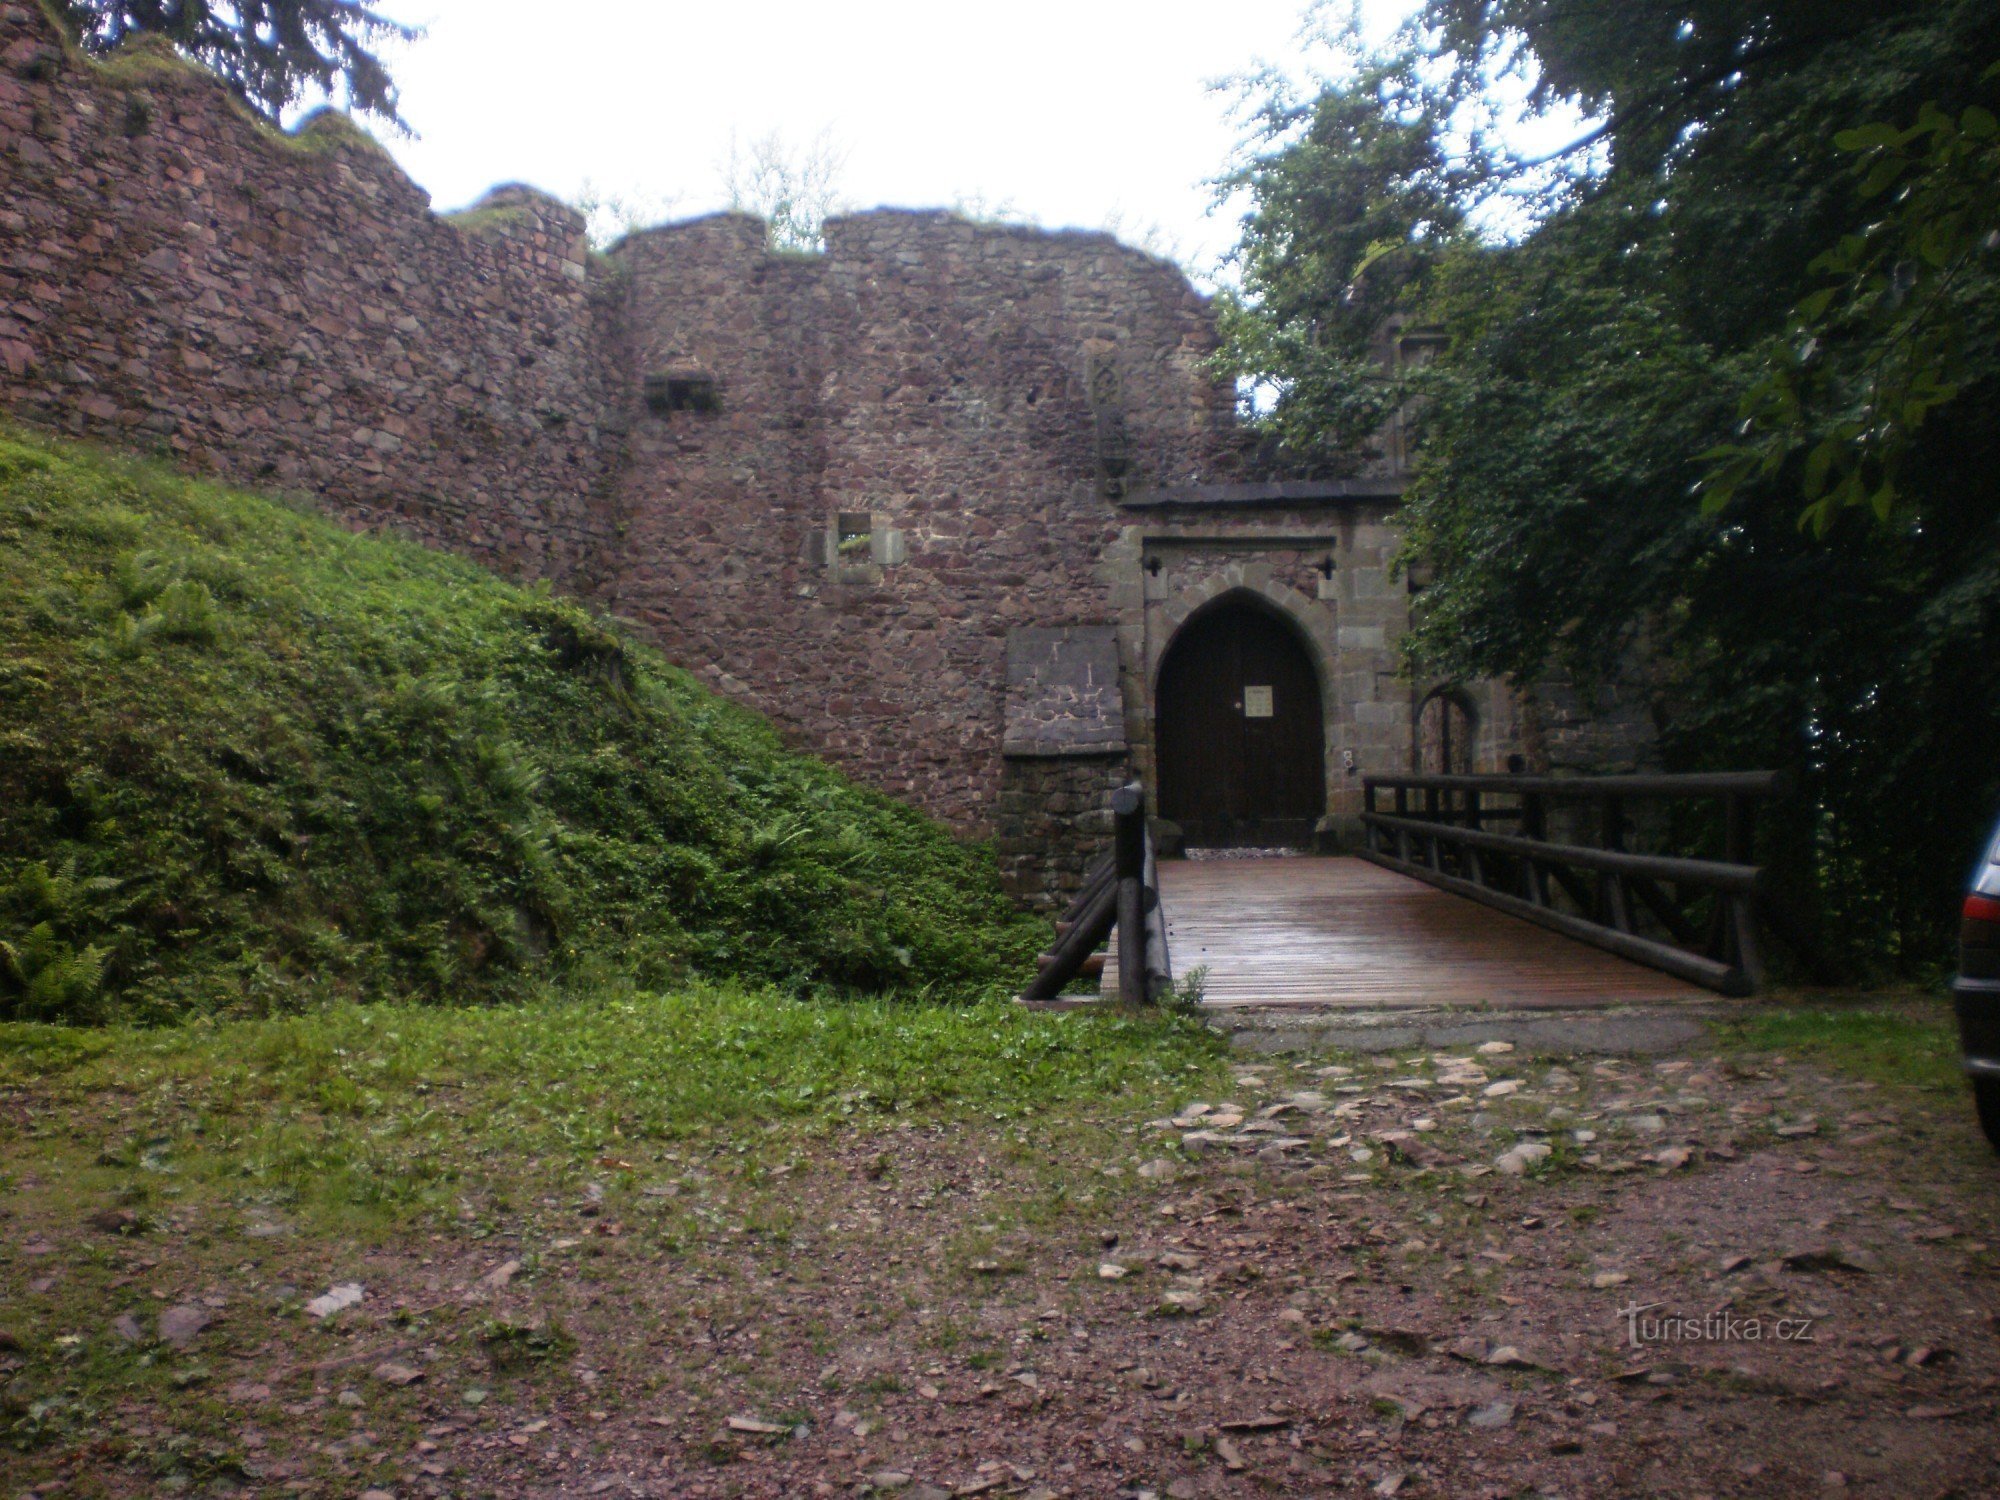 Gate to the ruins of Litice